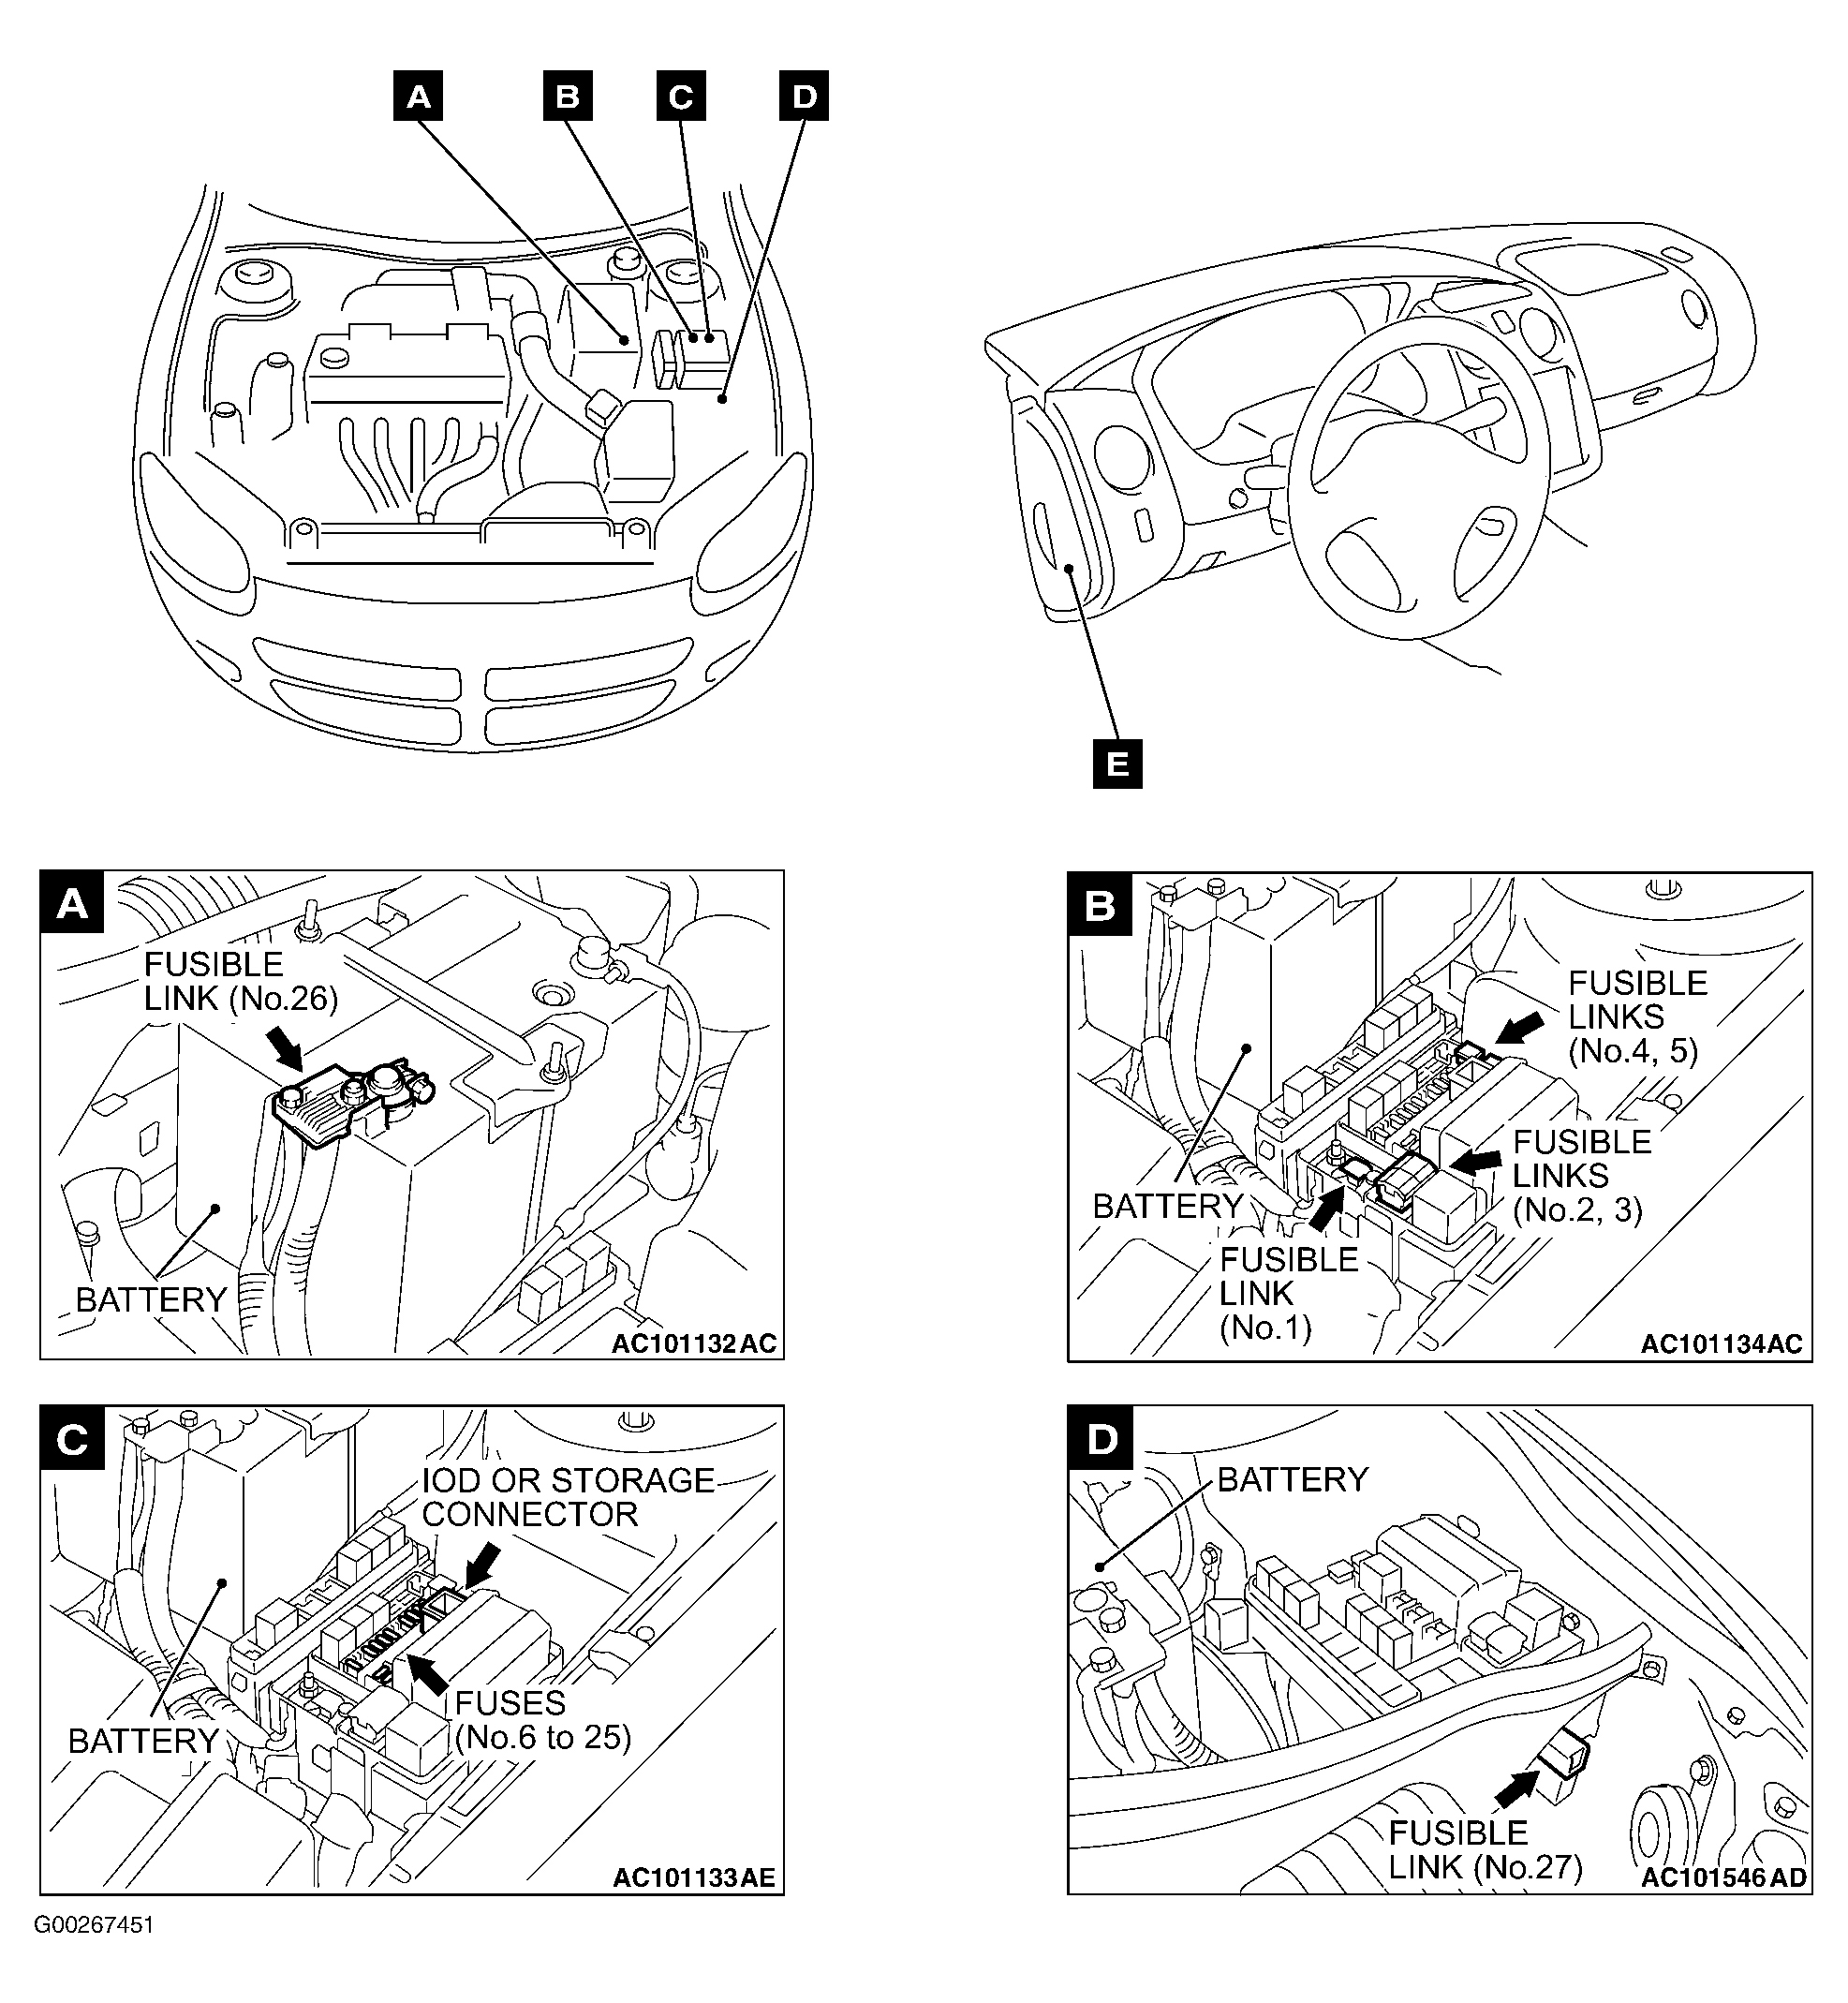 Chrysler Sebring 2005 - Component Locations -  Engine Compartment & Dash (1 Of 2)